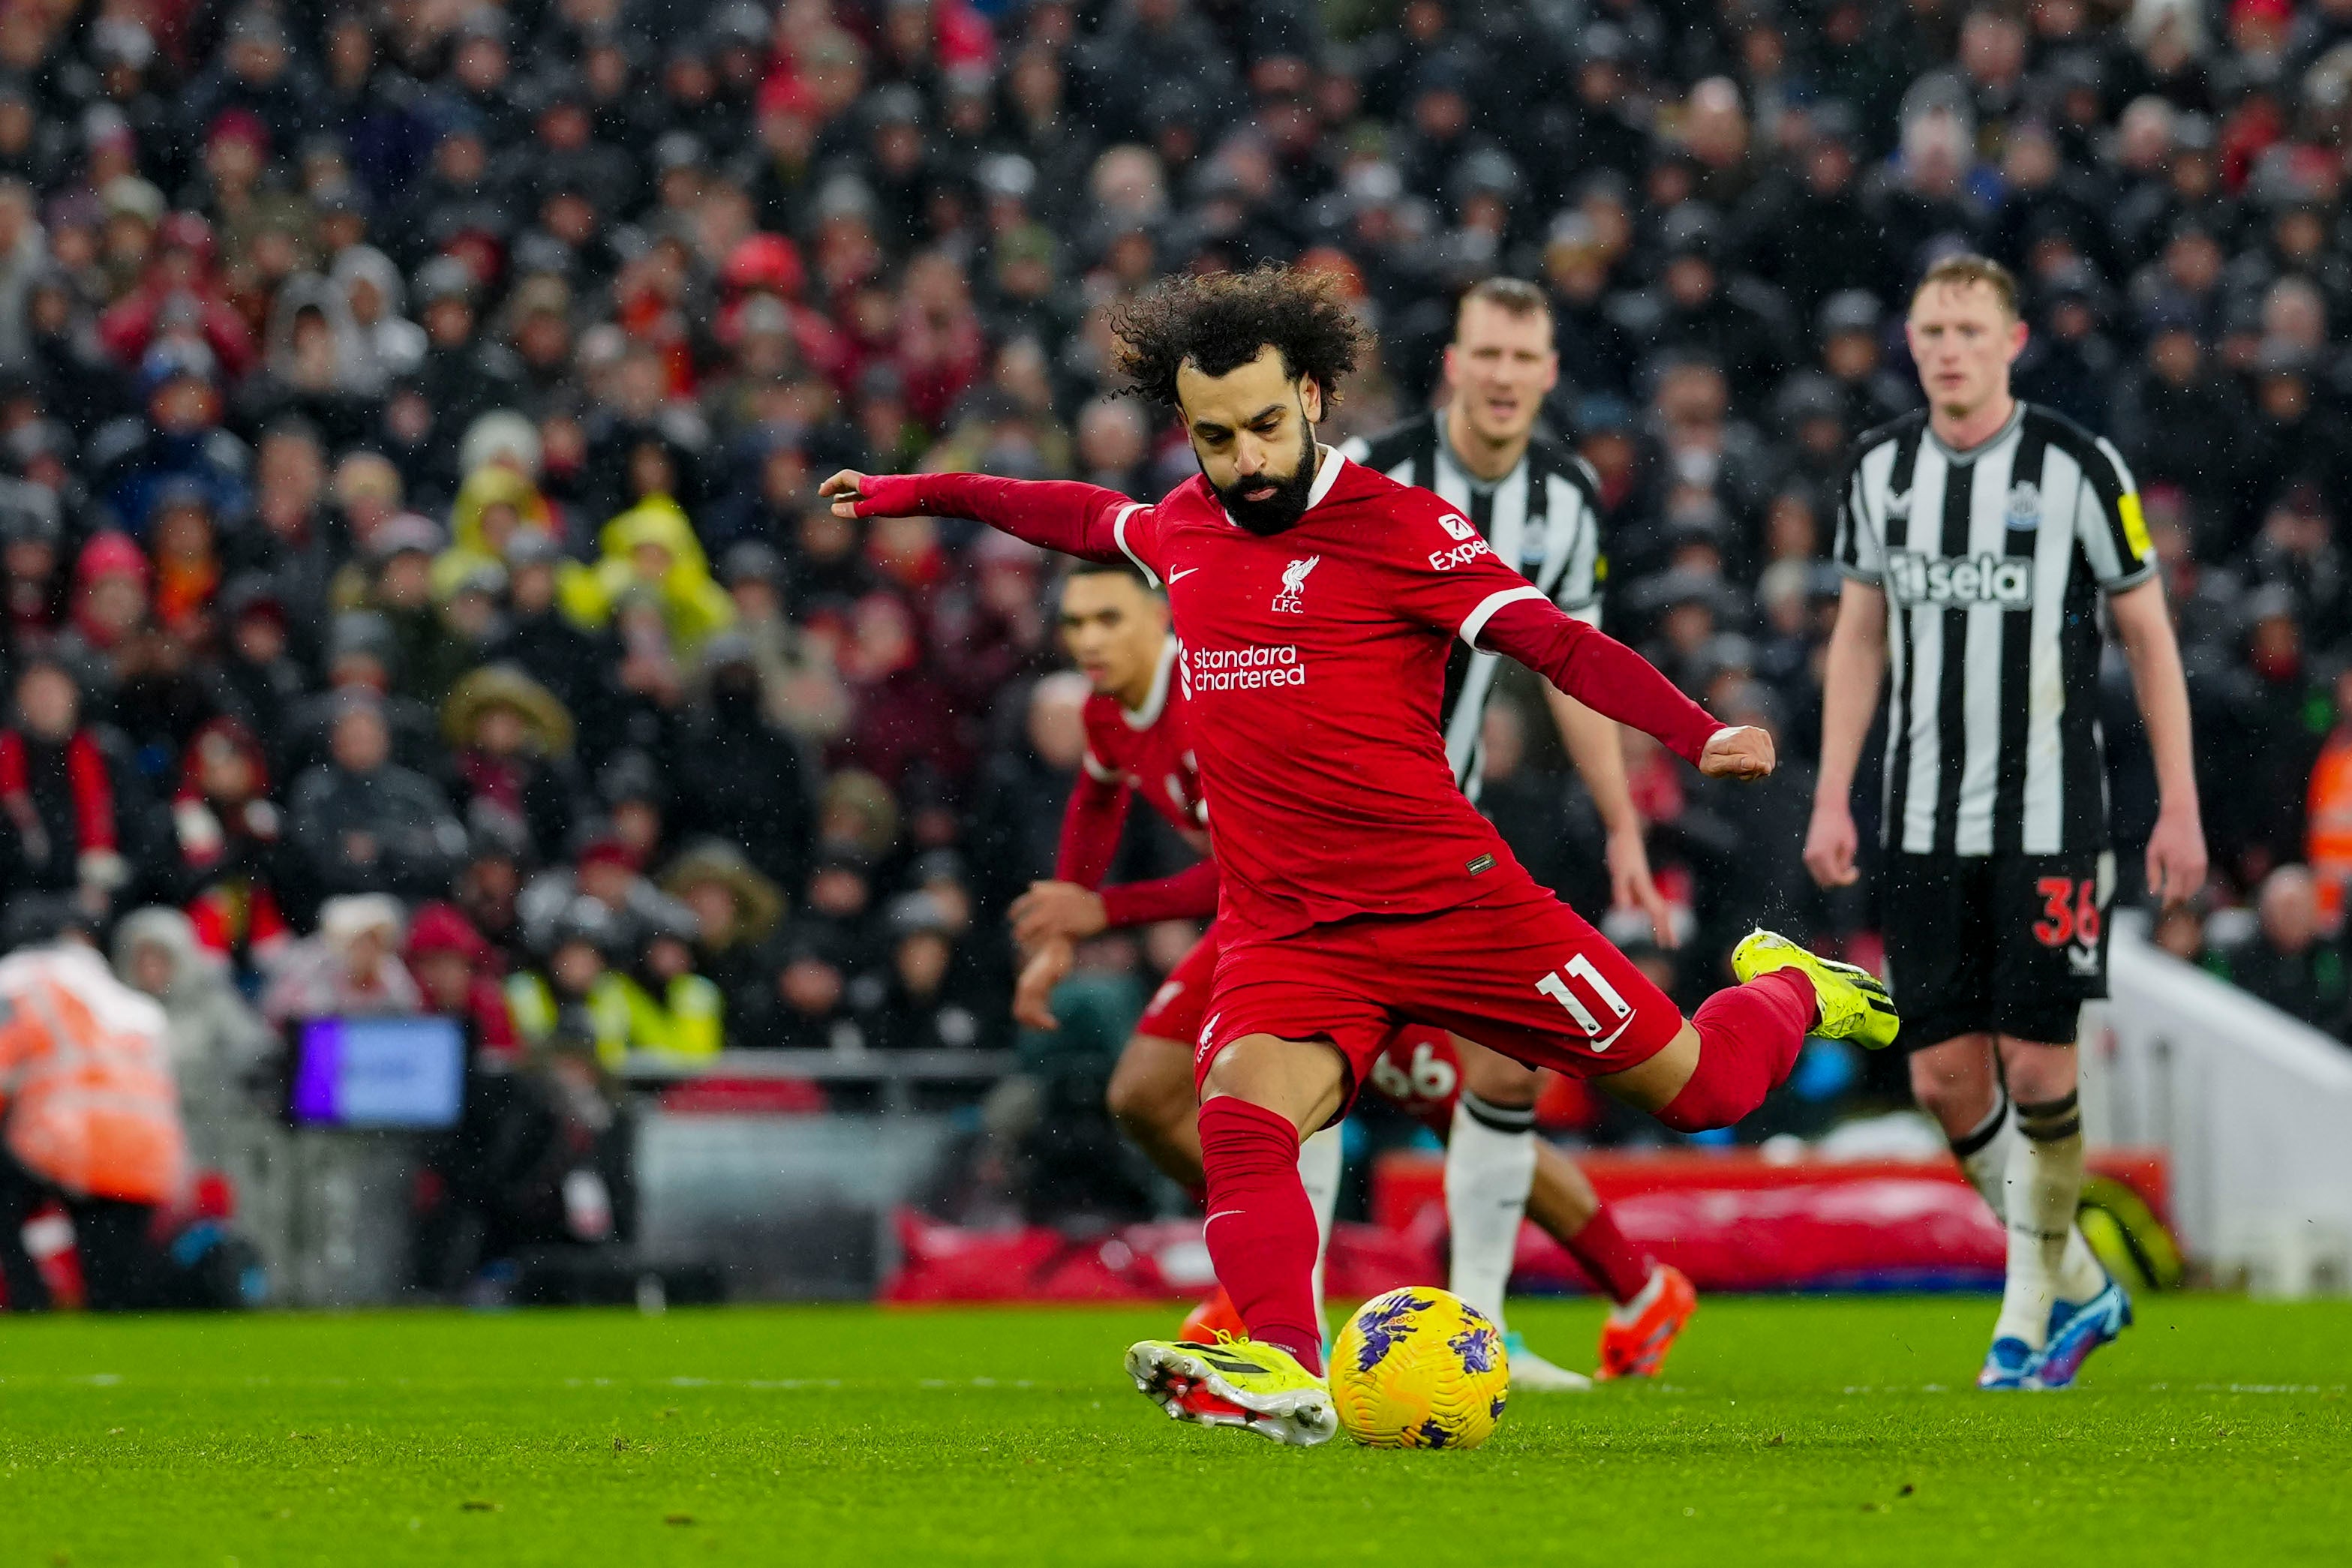 Liverpool will have to sustain their title push without Salah